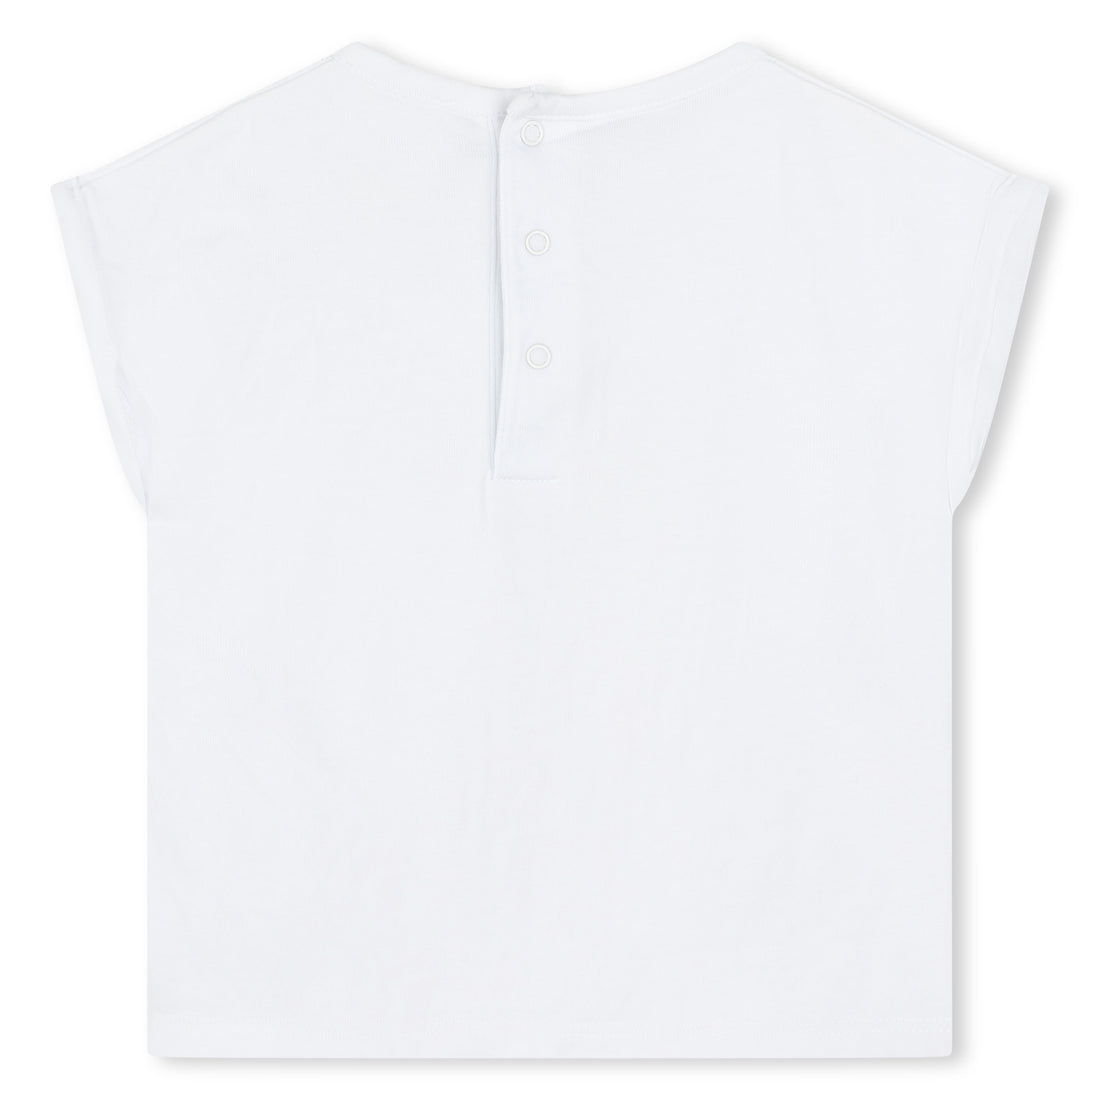 carrement-beau-short-sleeves-tee-shirt-white-carr-s24y30111-10p-06m